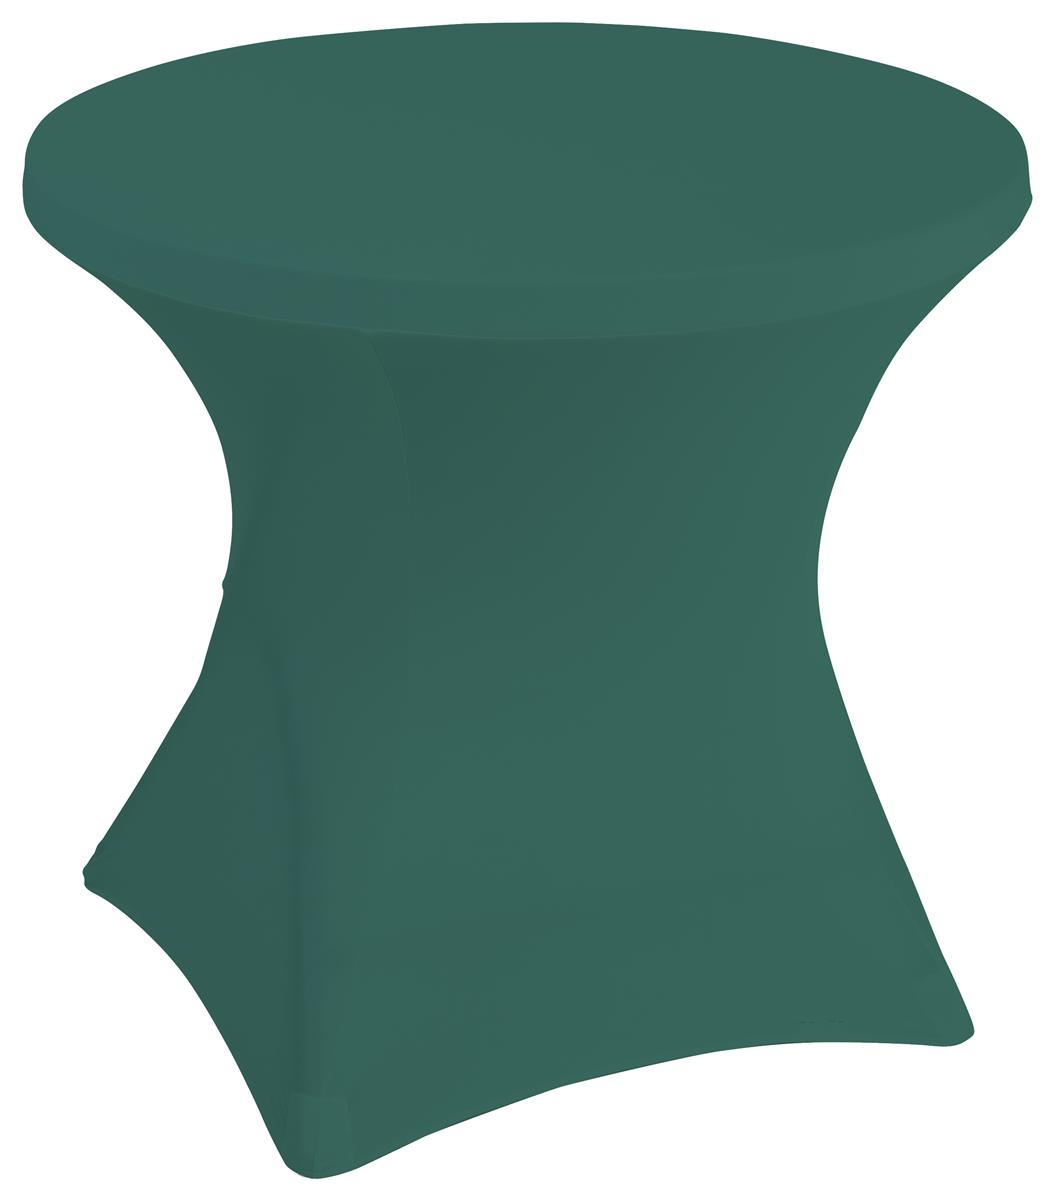 Stretch polyester tablecloths or 31 inch wide round tables